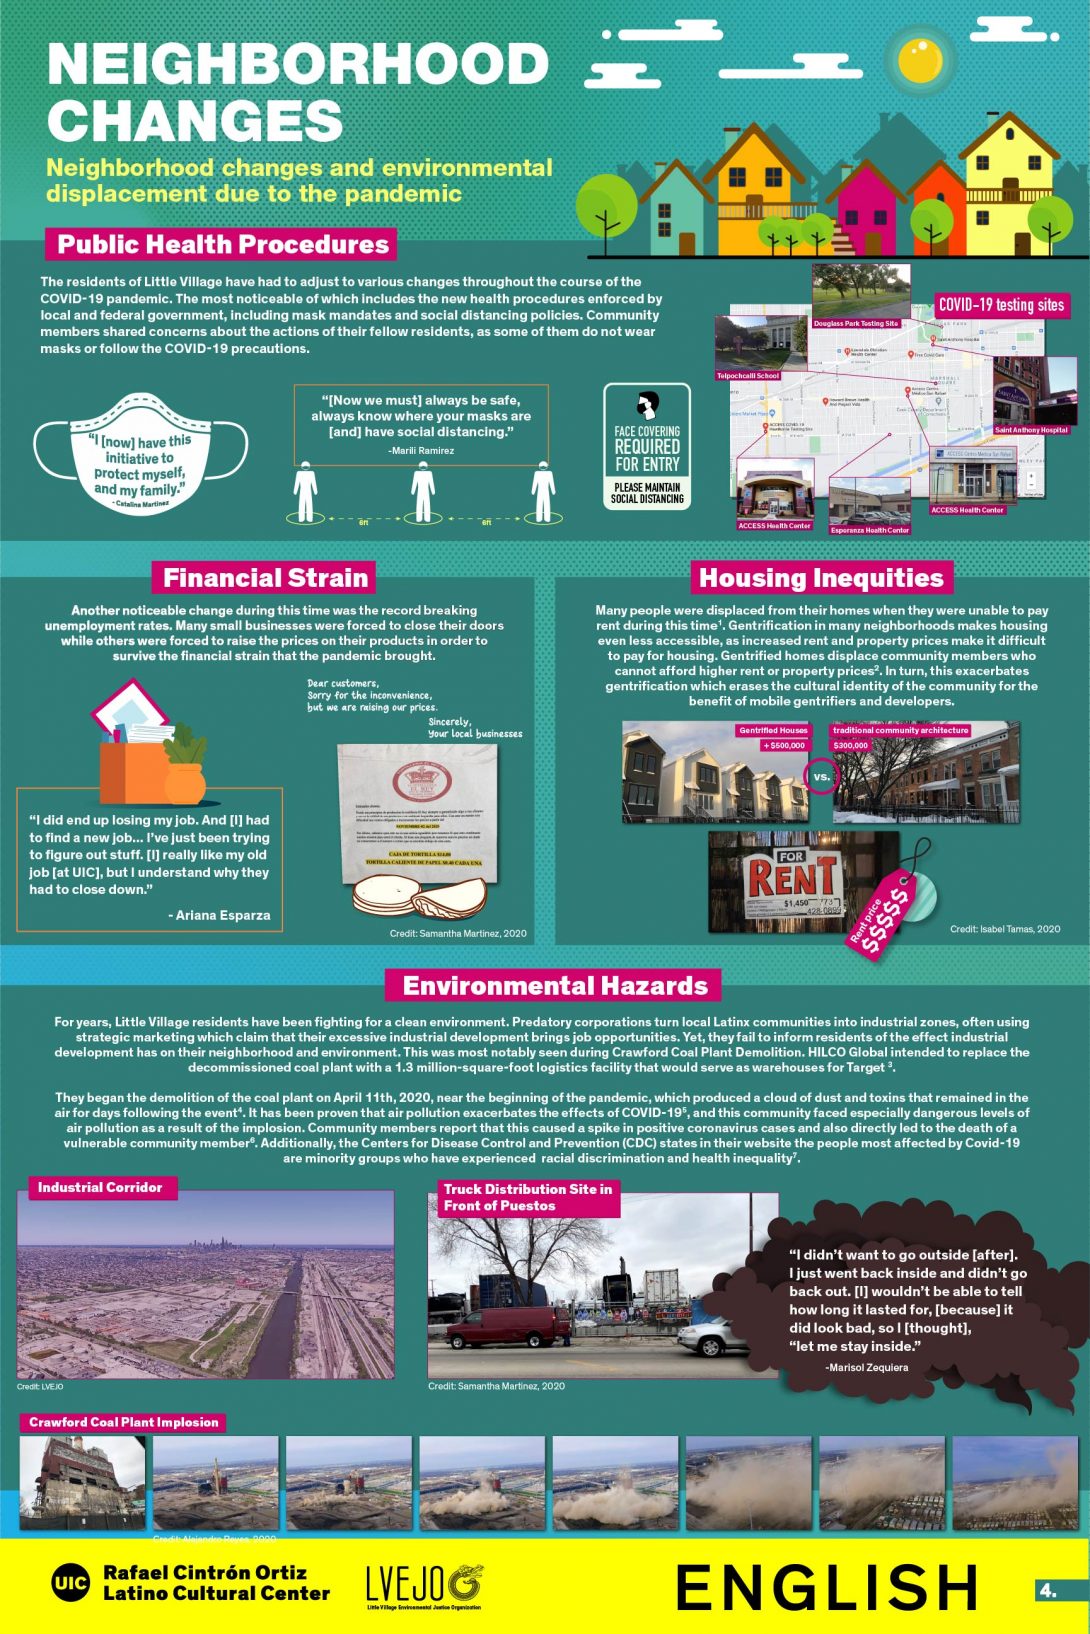 Header image of the second infographic includes a lively illustration of a city with bright houses